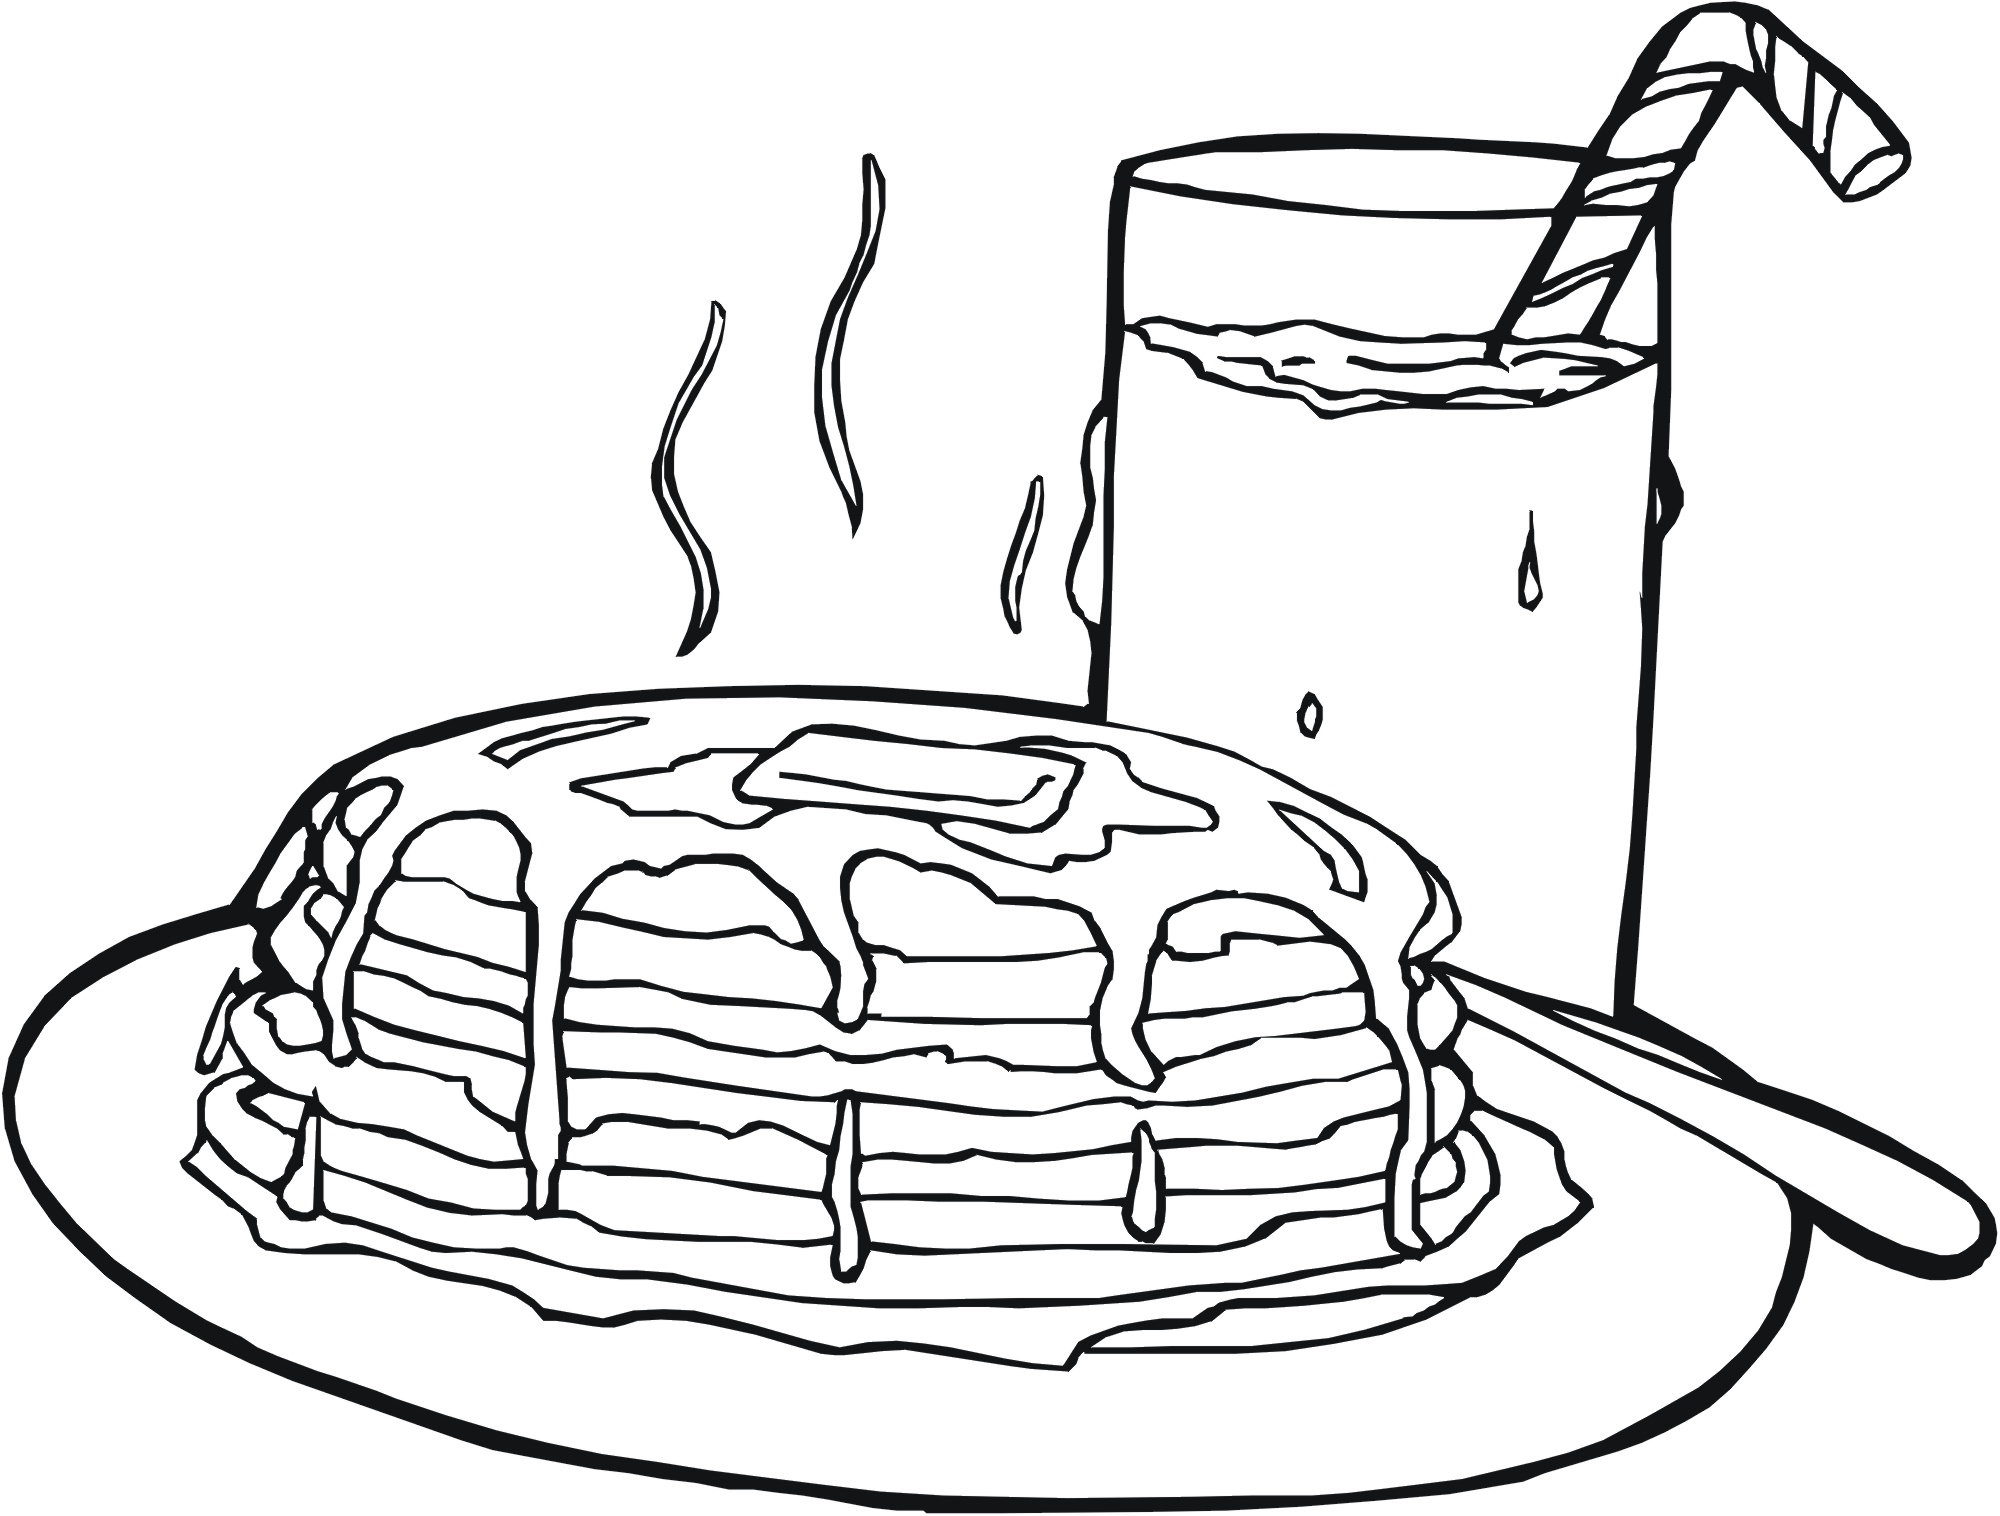 16+ Free Kids Coloring Pages Food Background - Drawer